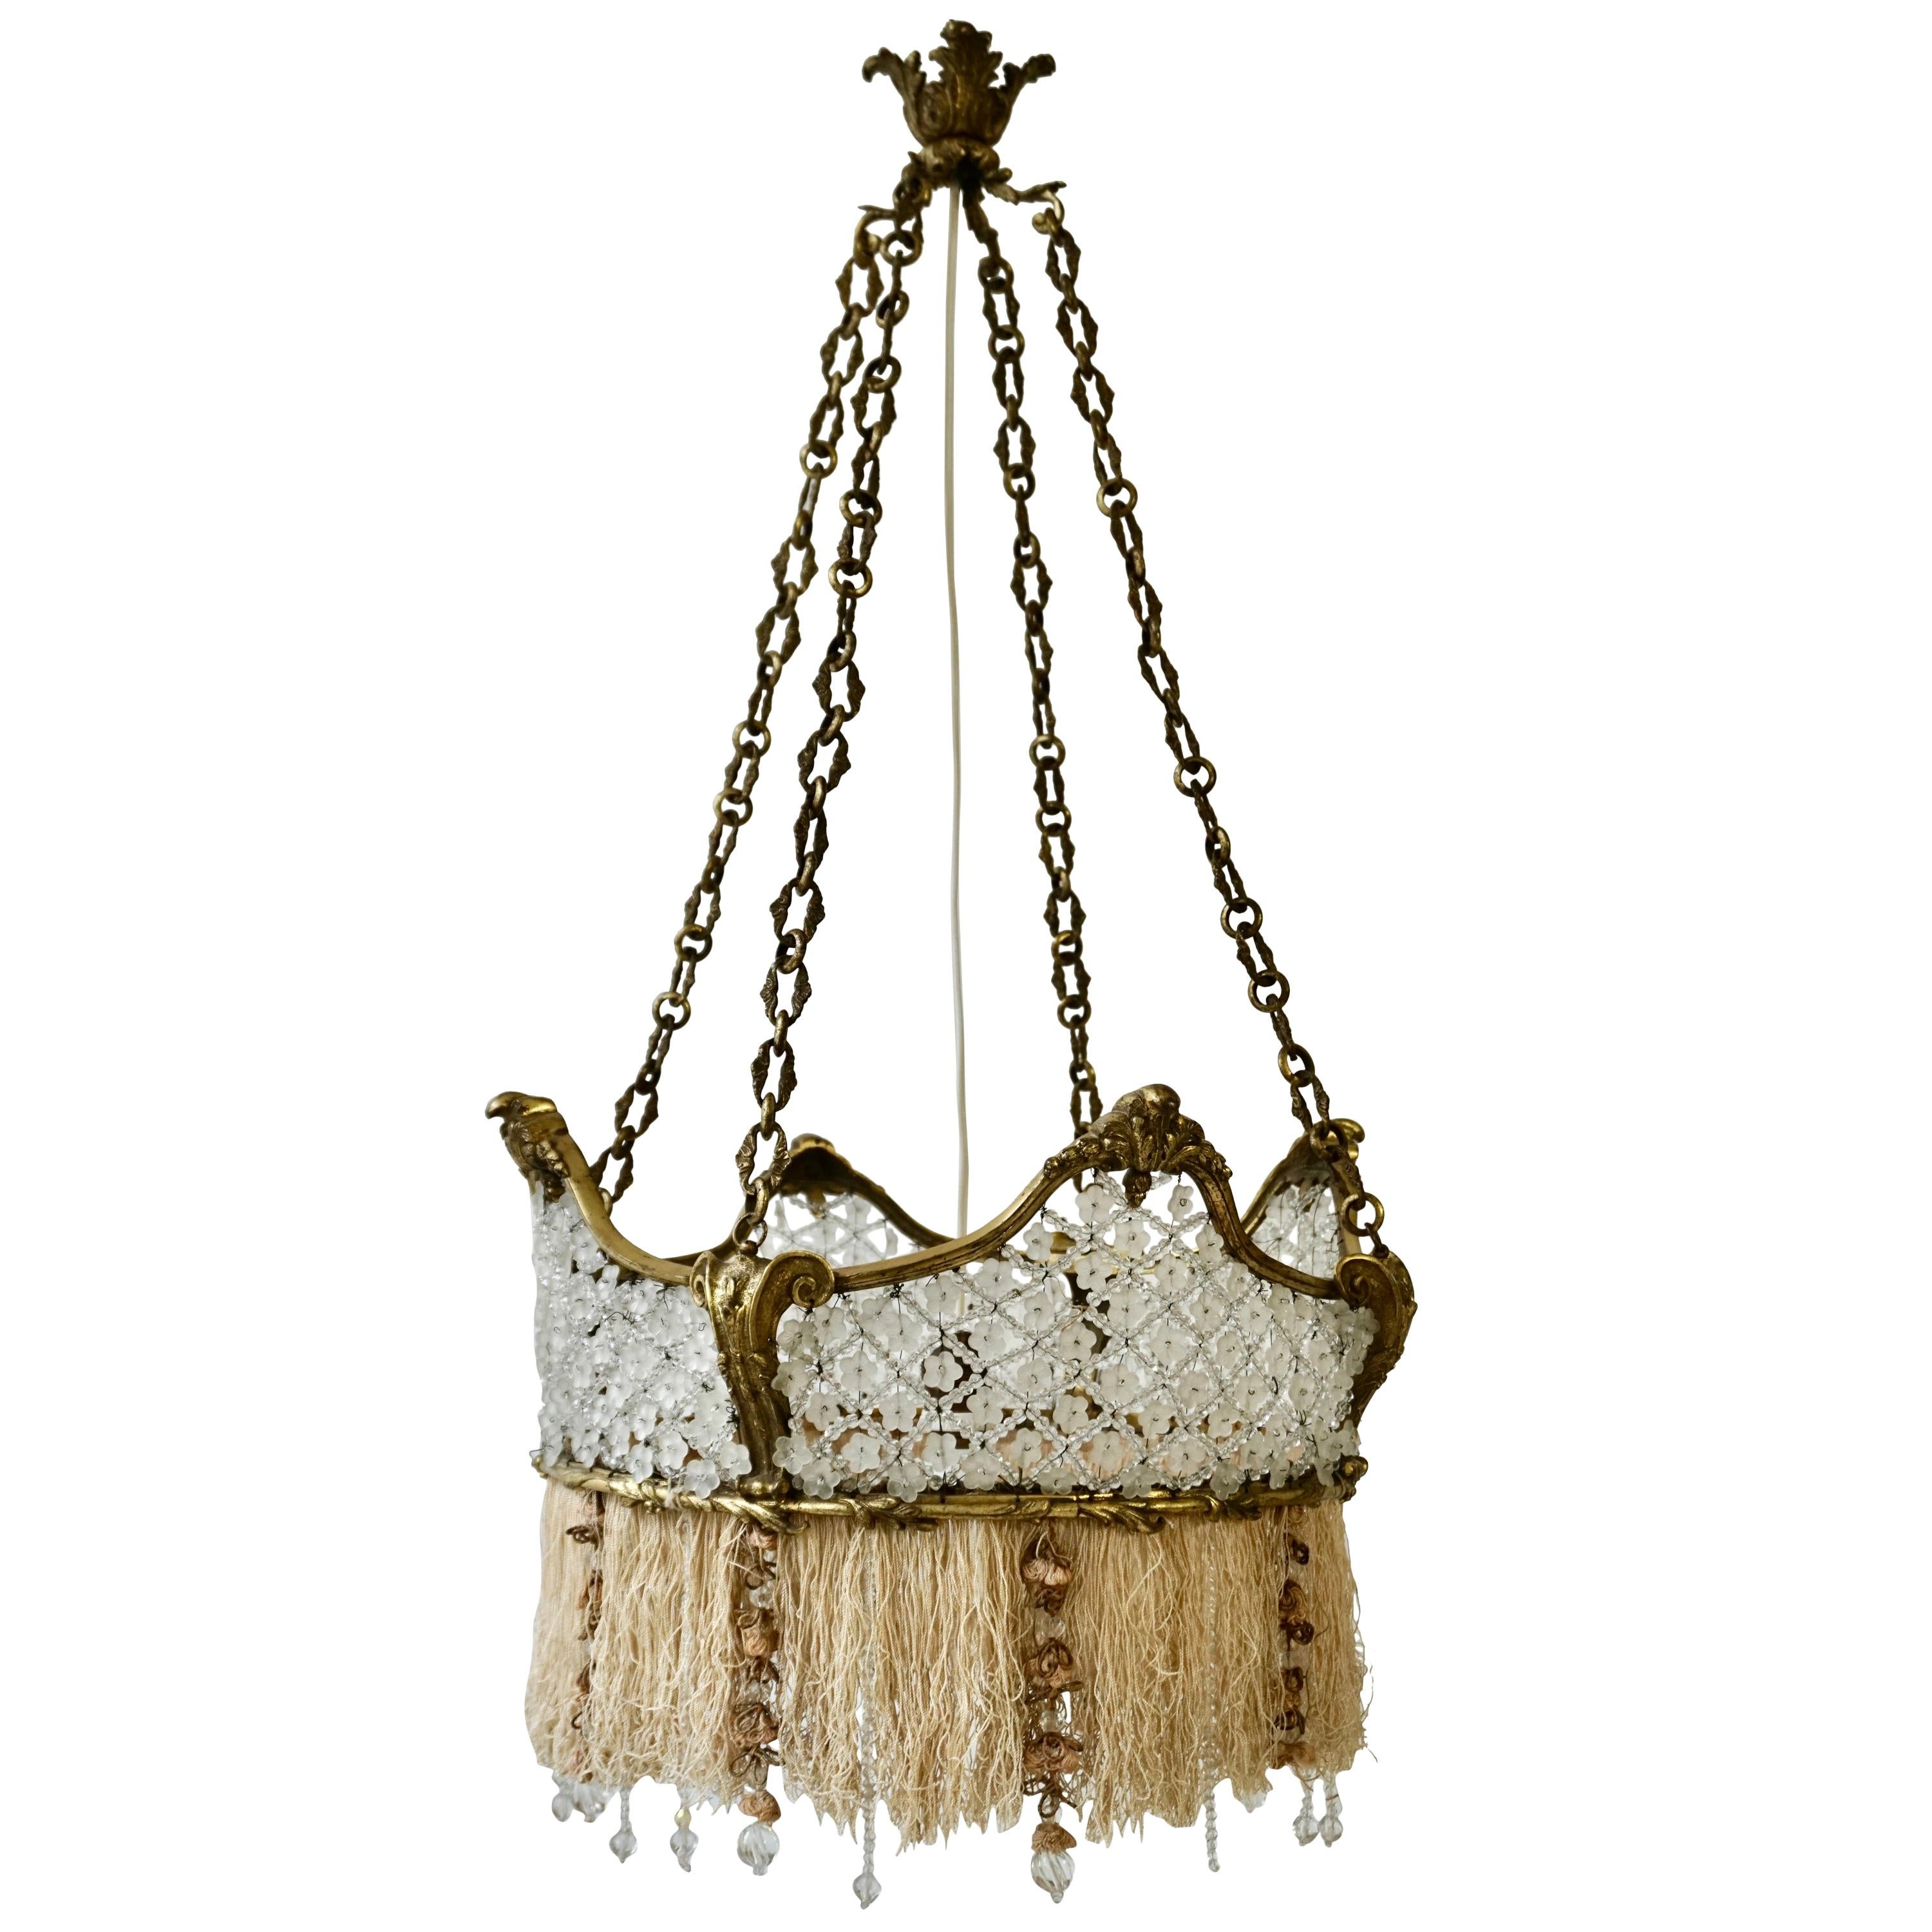 French Midcentury Bronze and Glass Flower Crown Chandelier with Gold Accents